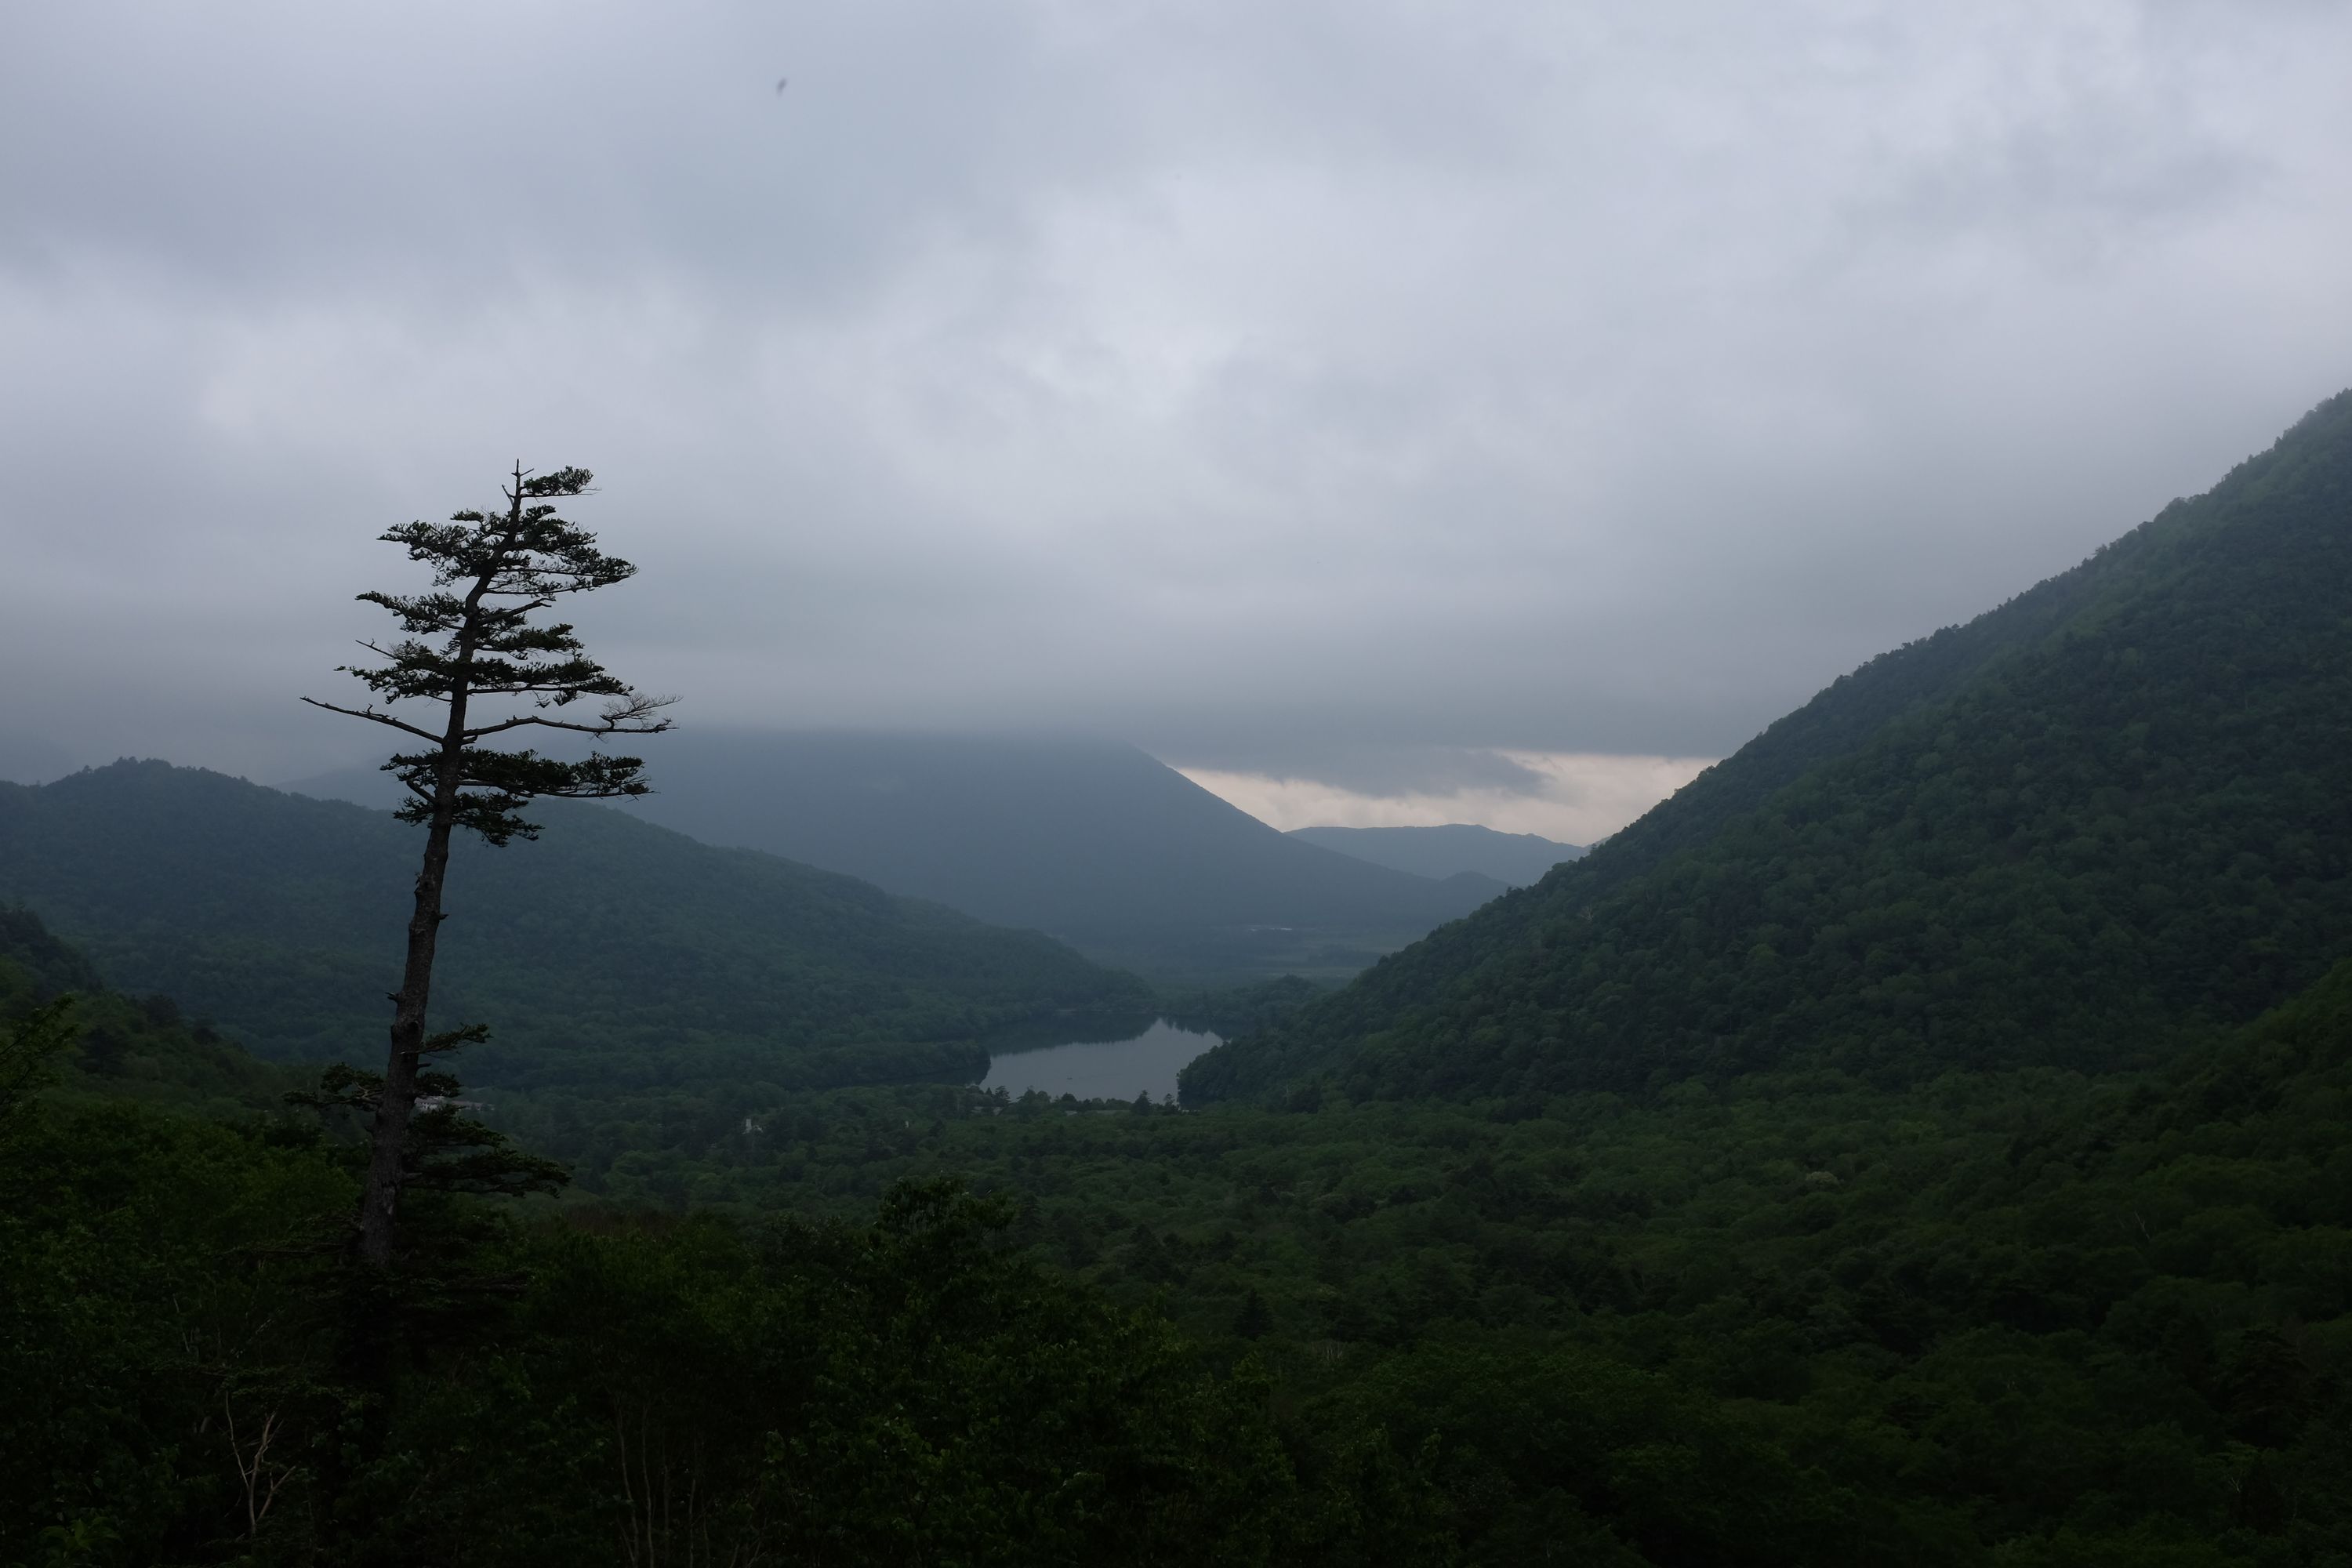 Panoramic view of a gloomy mountain landscape, with a lone pine against a dark grey sky.